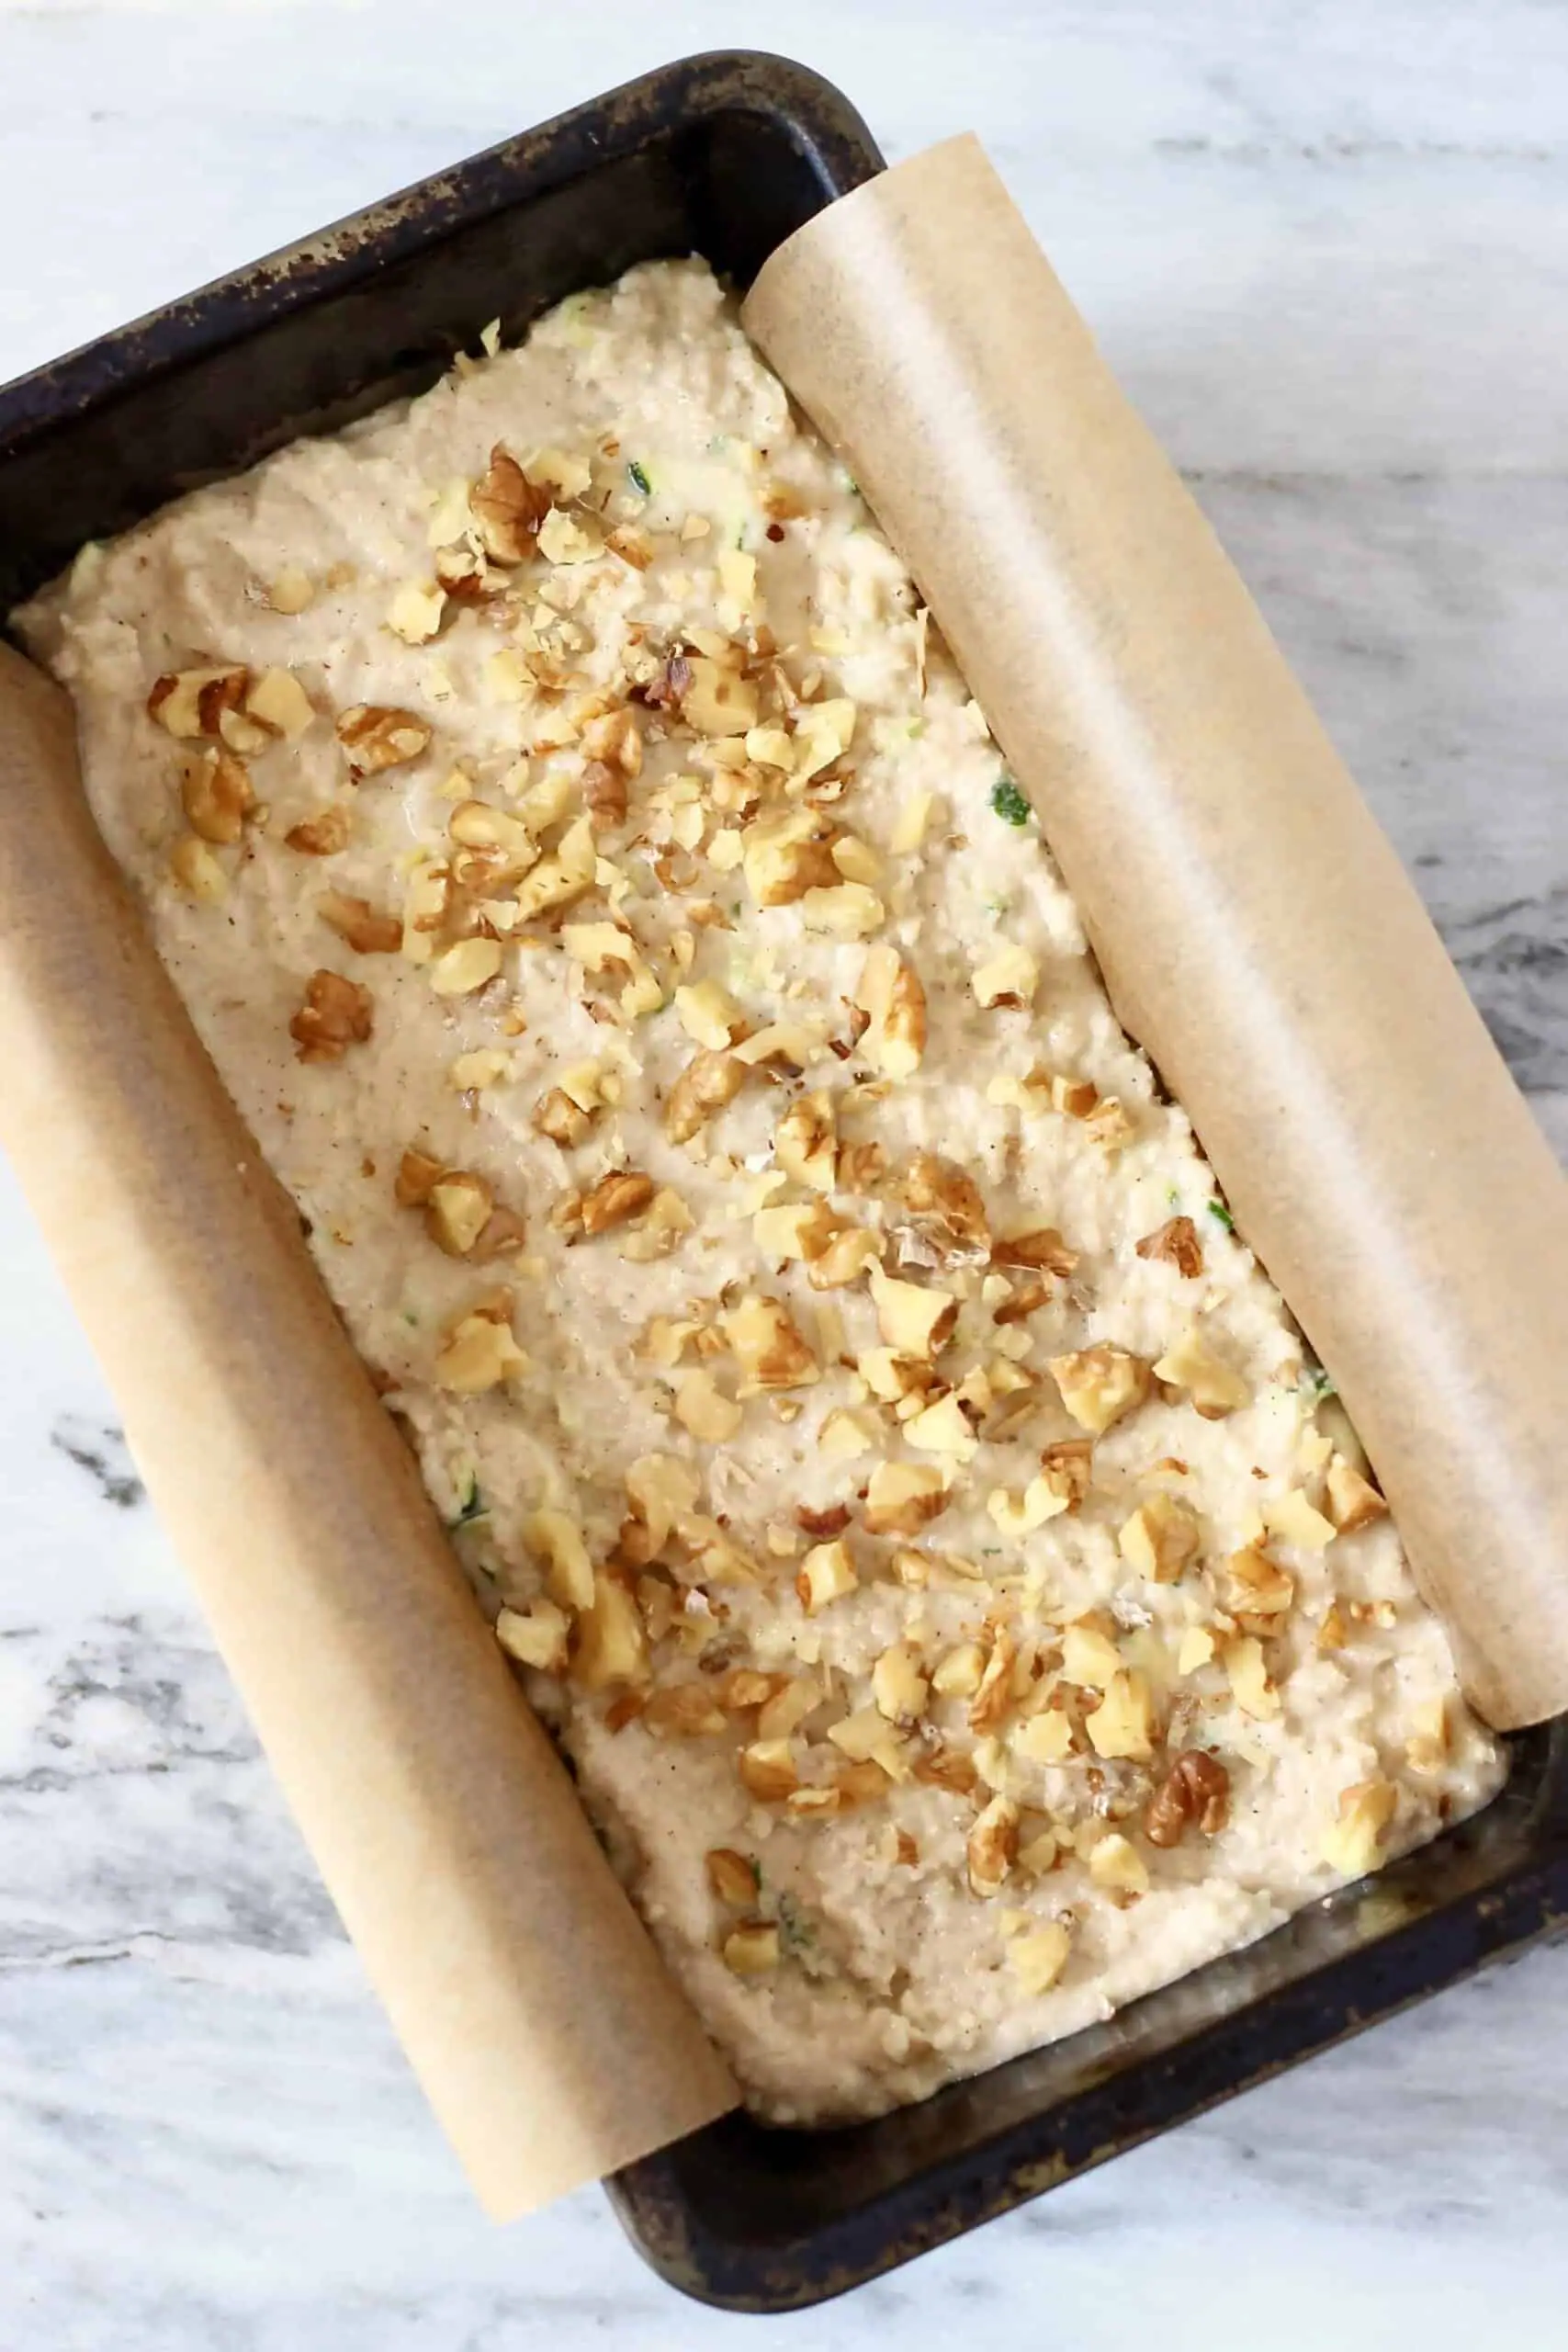 Raw gluten-free vegan zucchini bread batter in a loaf tin topped with chopped walnuts